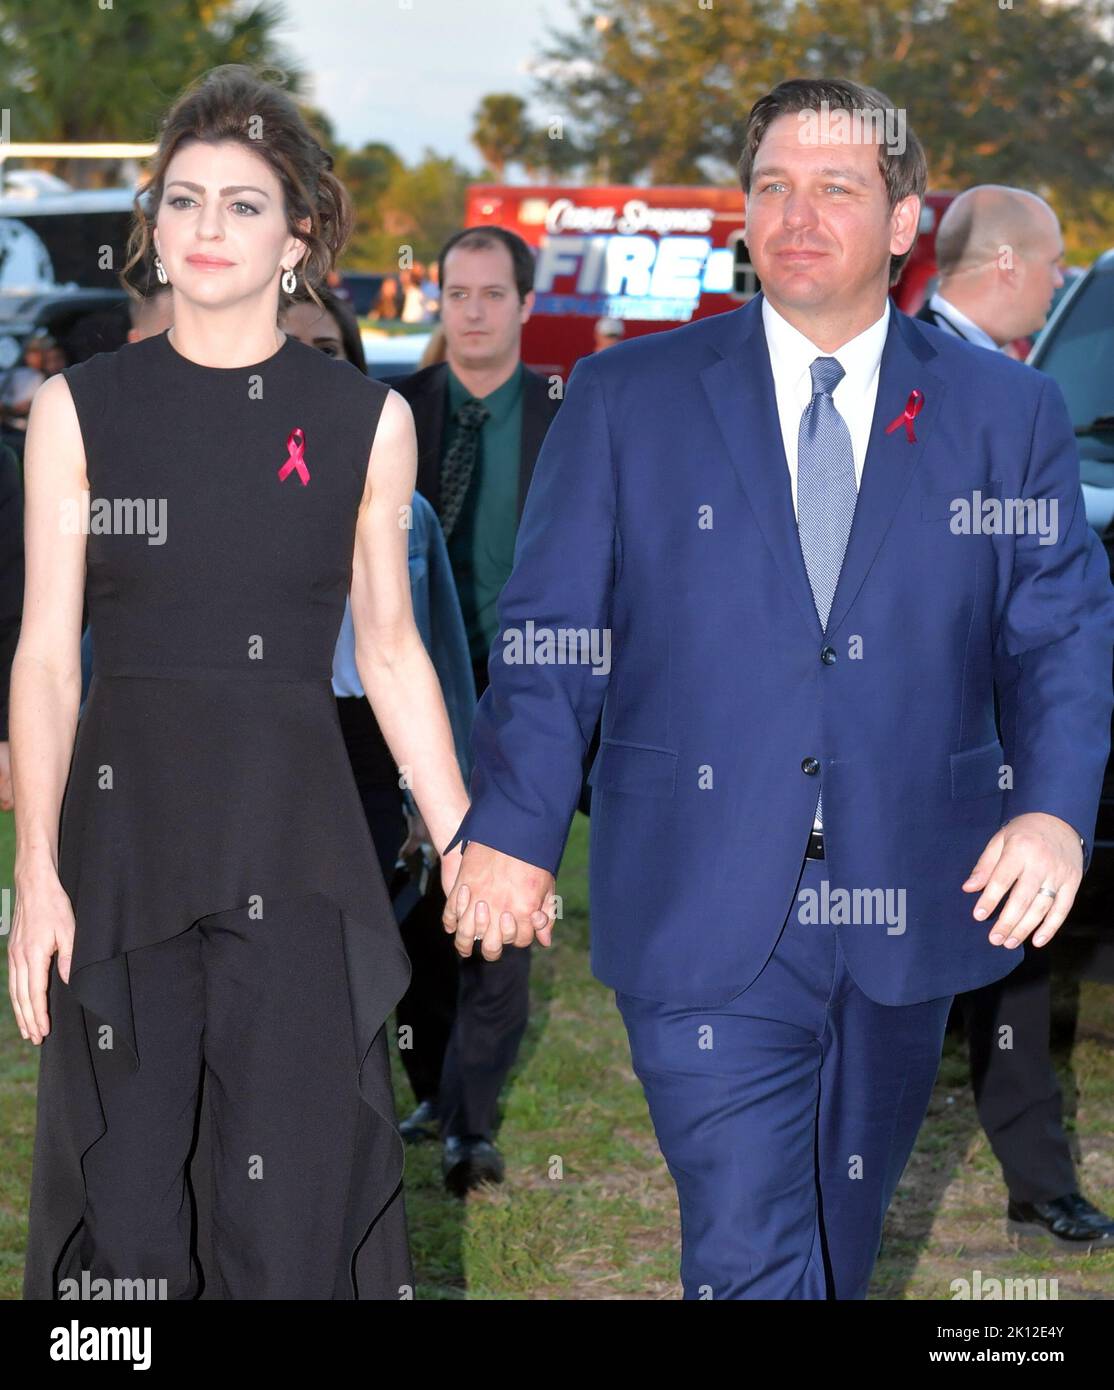 PARKLAND, FL - FEBRUARY 14: Gov Ron DeSantis and wife Casey DeSantis watch ceremony with tears in their eyes. Seventeen people were shot and killed by an ex-student at Marjory Stoneman Douglas High School (MSD) in Parkland, Florida on 14 February 2018. Students and educators across the country are also marking the day with vigils, moments of silence, art projects and other demonstrations. Police originally arrested 19-year-old former student Nikolas Cruz for killing 17 people at the Marjory Stoneman Douglas High School, at Pine Trail Park on February 14, 2019 in Parkland, Florida   People:  Go Stock Photo